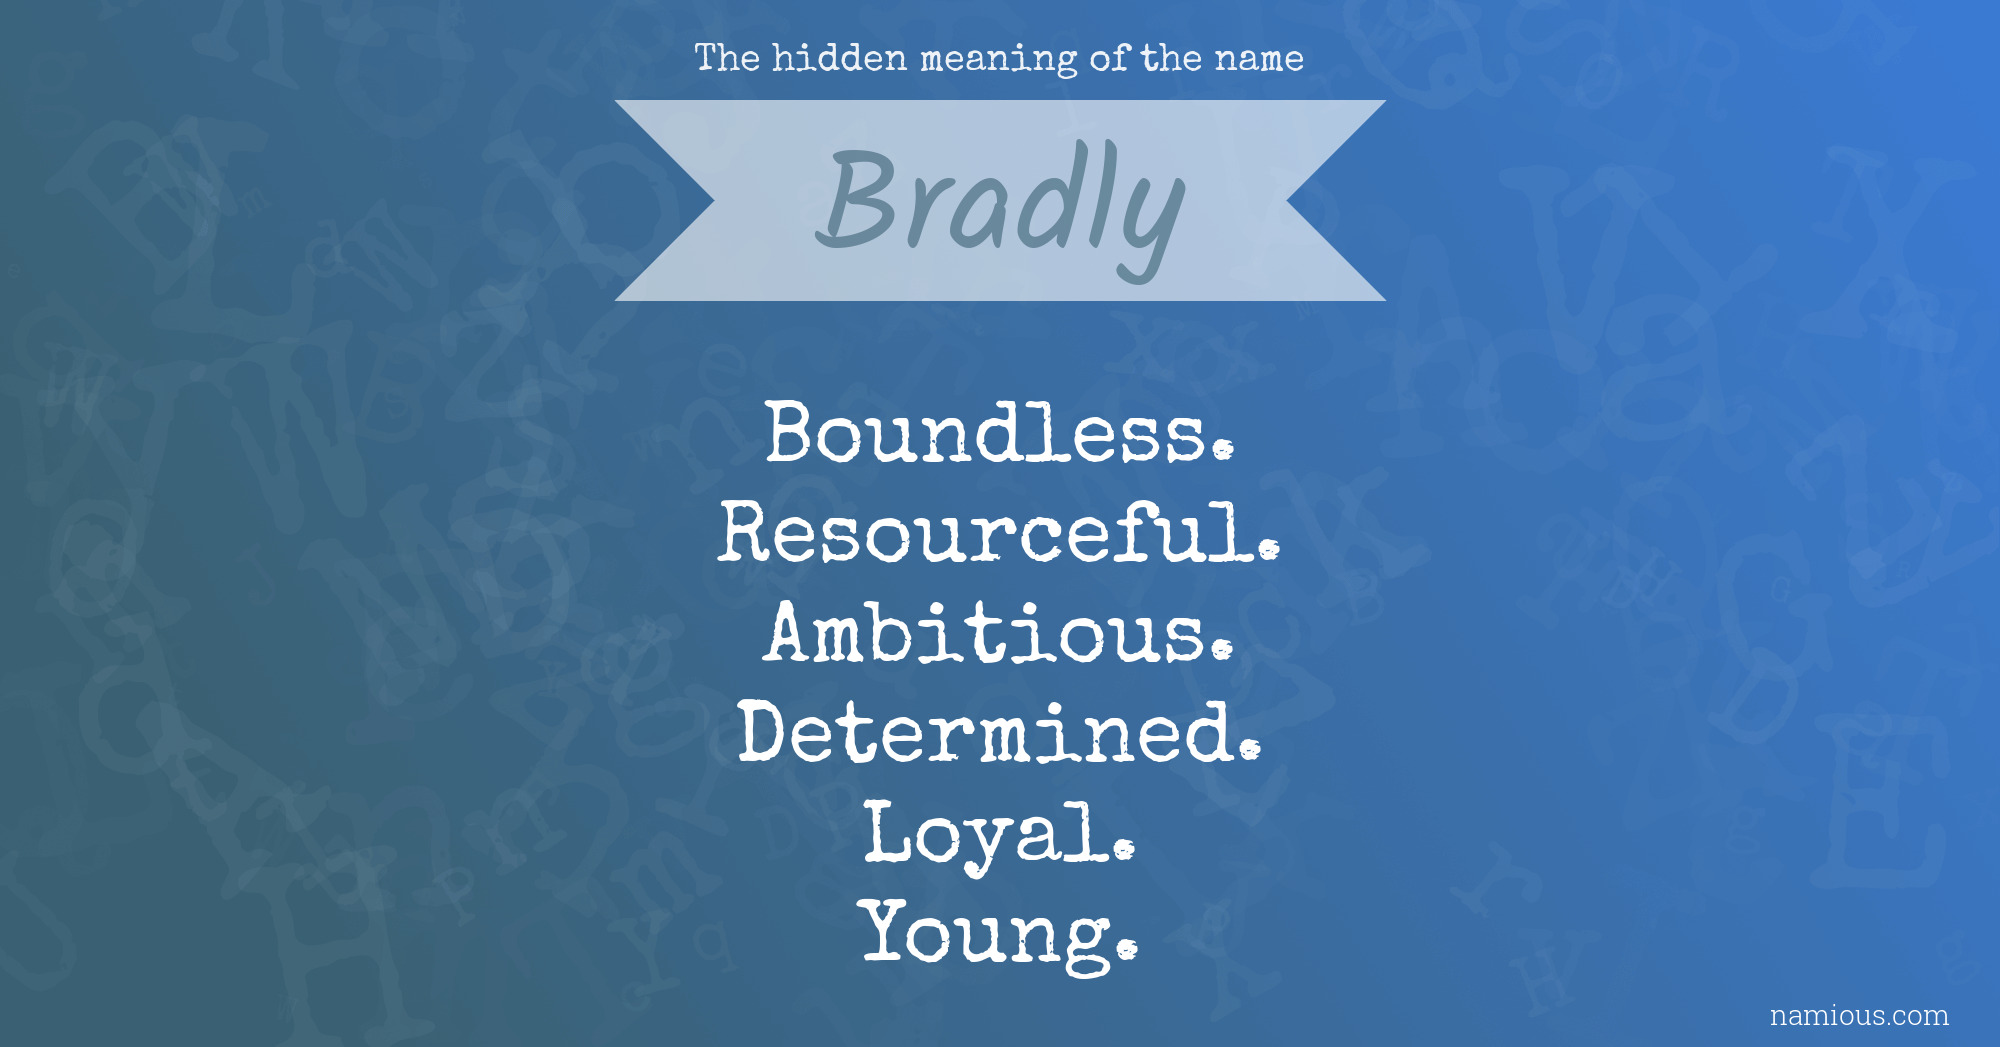 The hidden meaning of the name Bradly